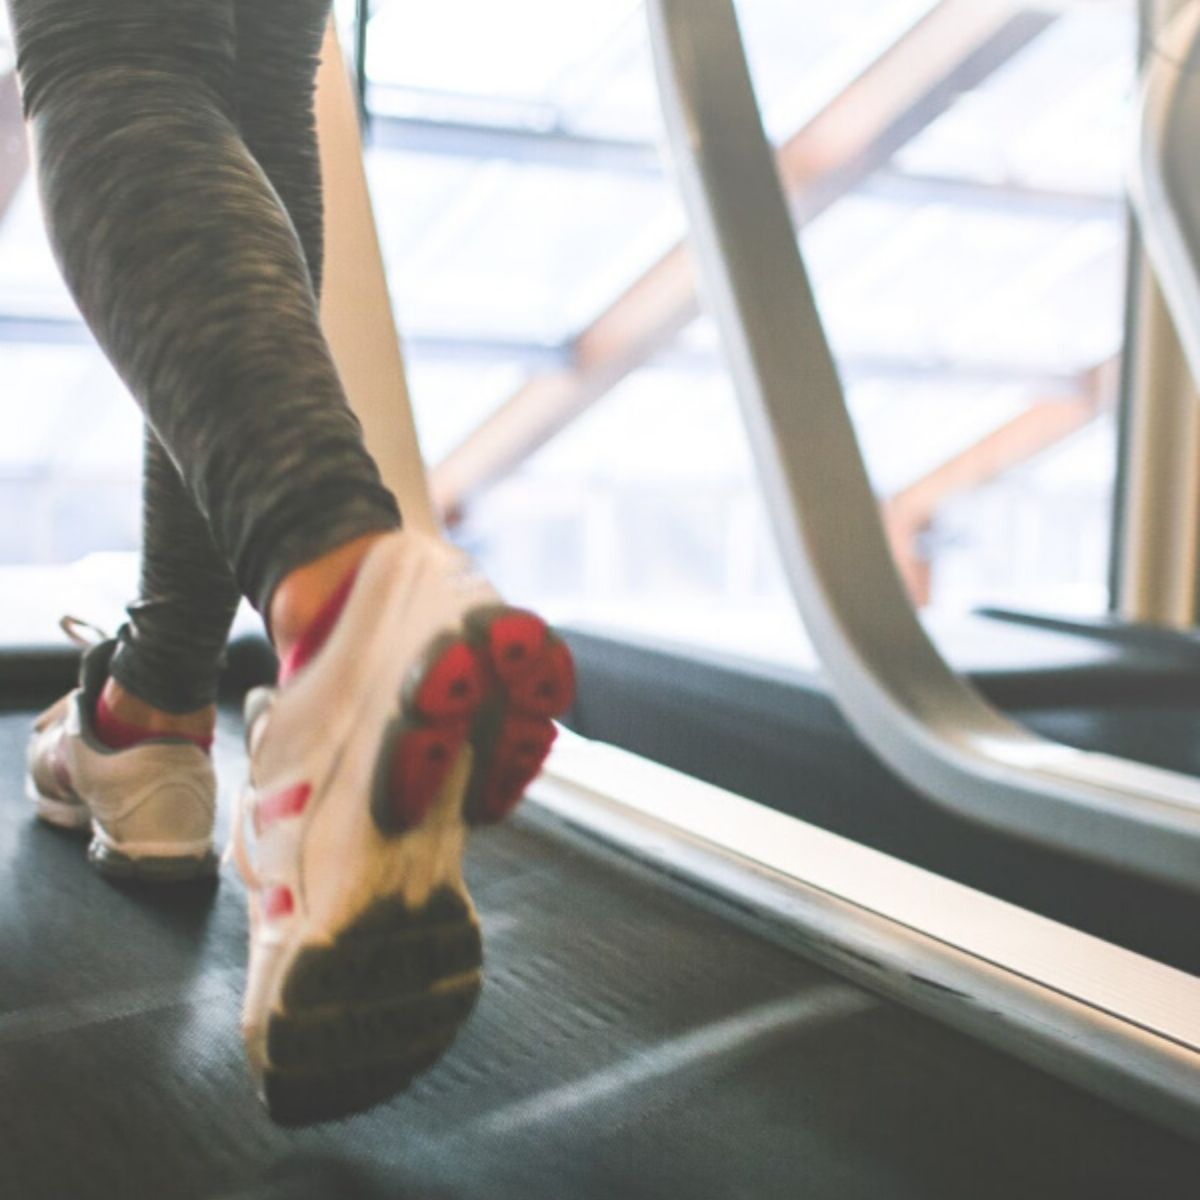 Treadmill workout for beginners